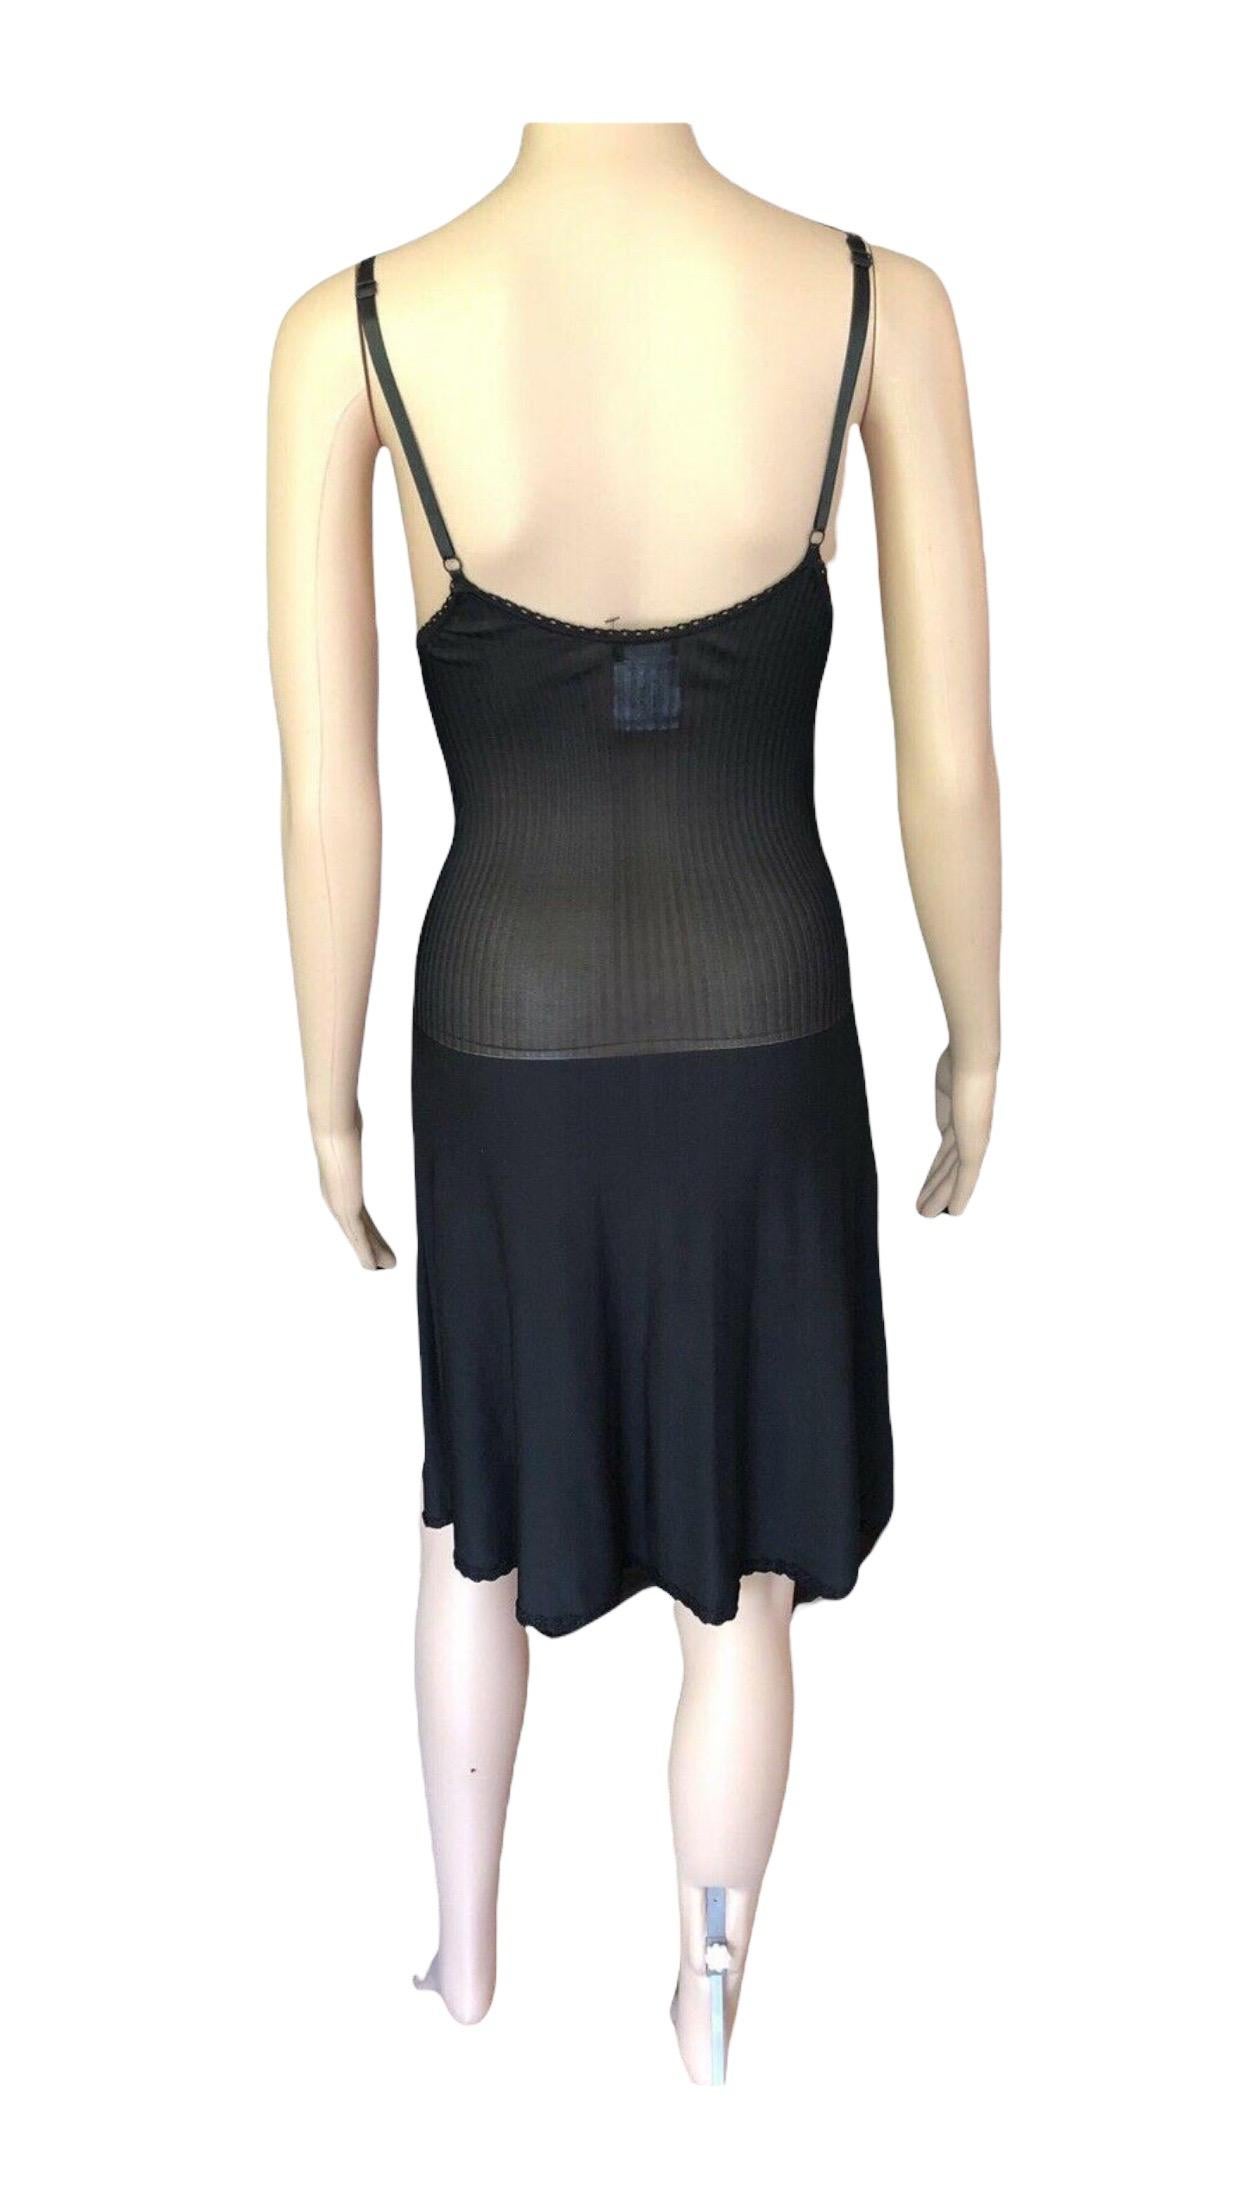 Chanel S/S 2008 Sheer Panel Lace Knit Black Dress  1